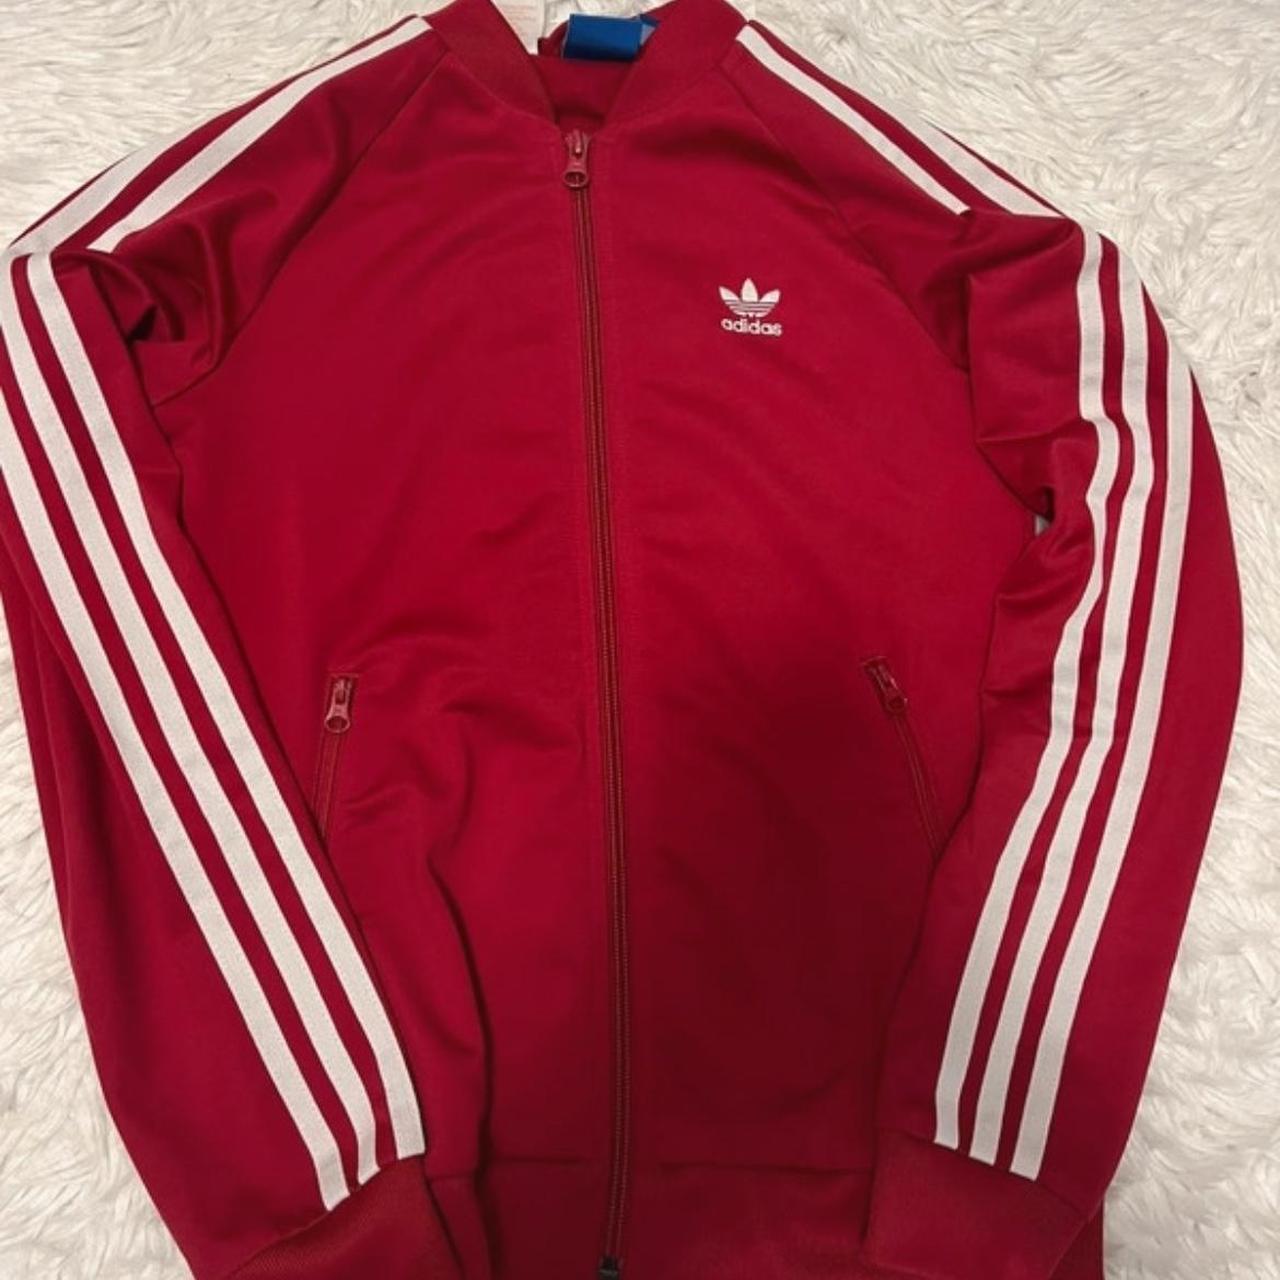 Adidas jacket size 11-12 years old (fits xs) #y2k... - Depop